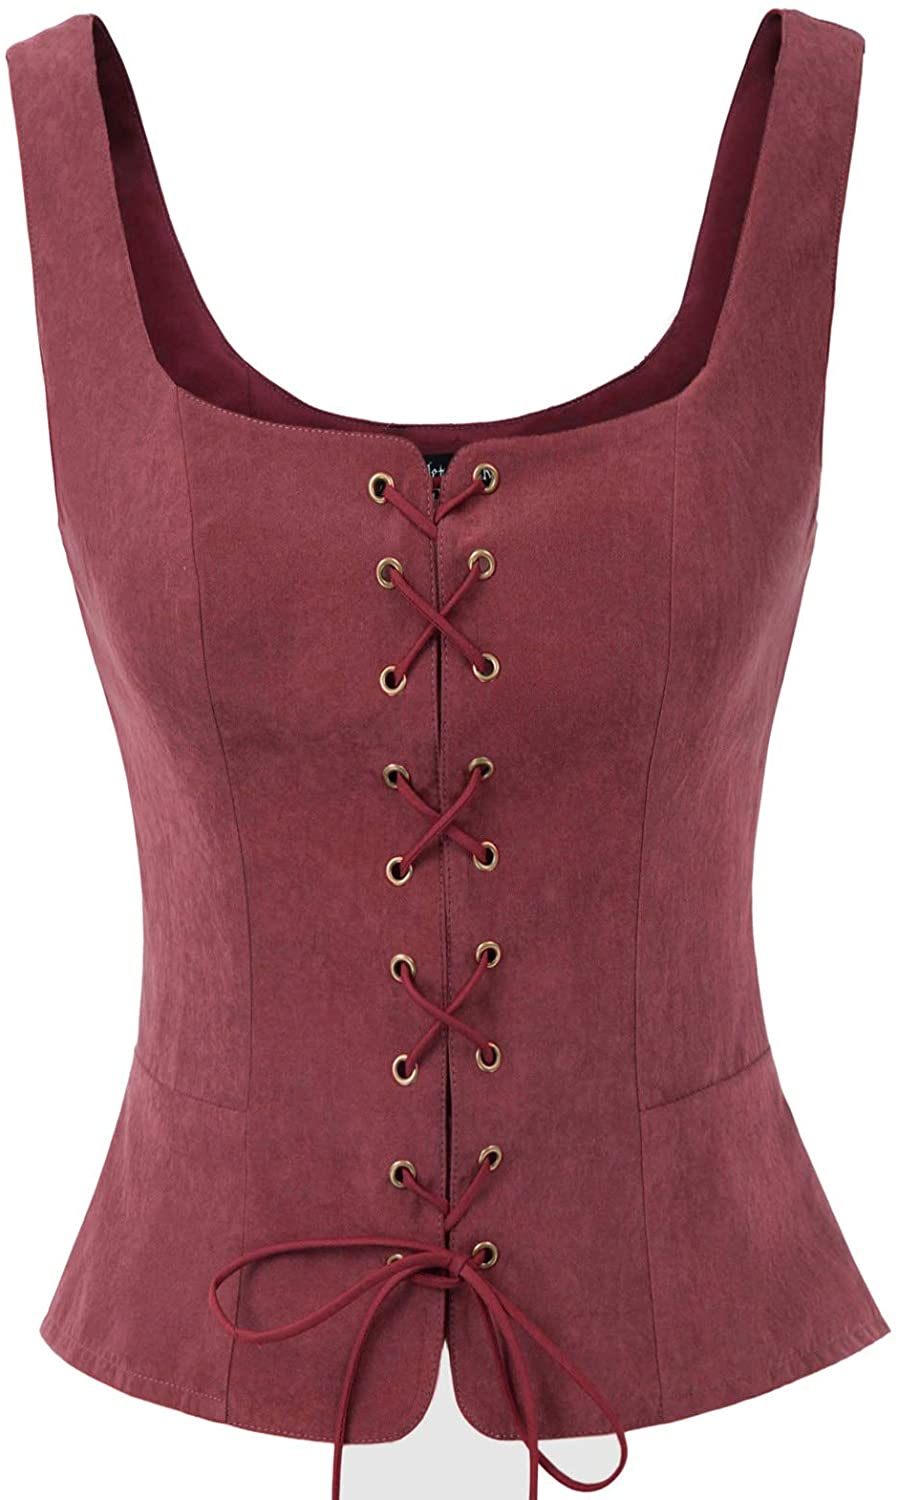 SCARLET DARKNESS Women Pirate Renaissance Vest Cosplay Costume Peasant Bodice Lace-up Waistcoat